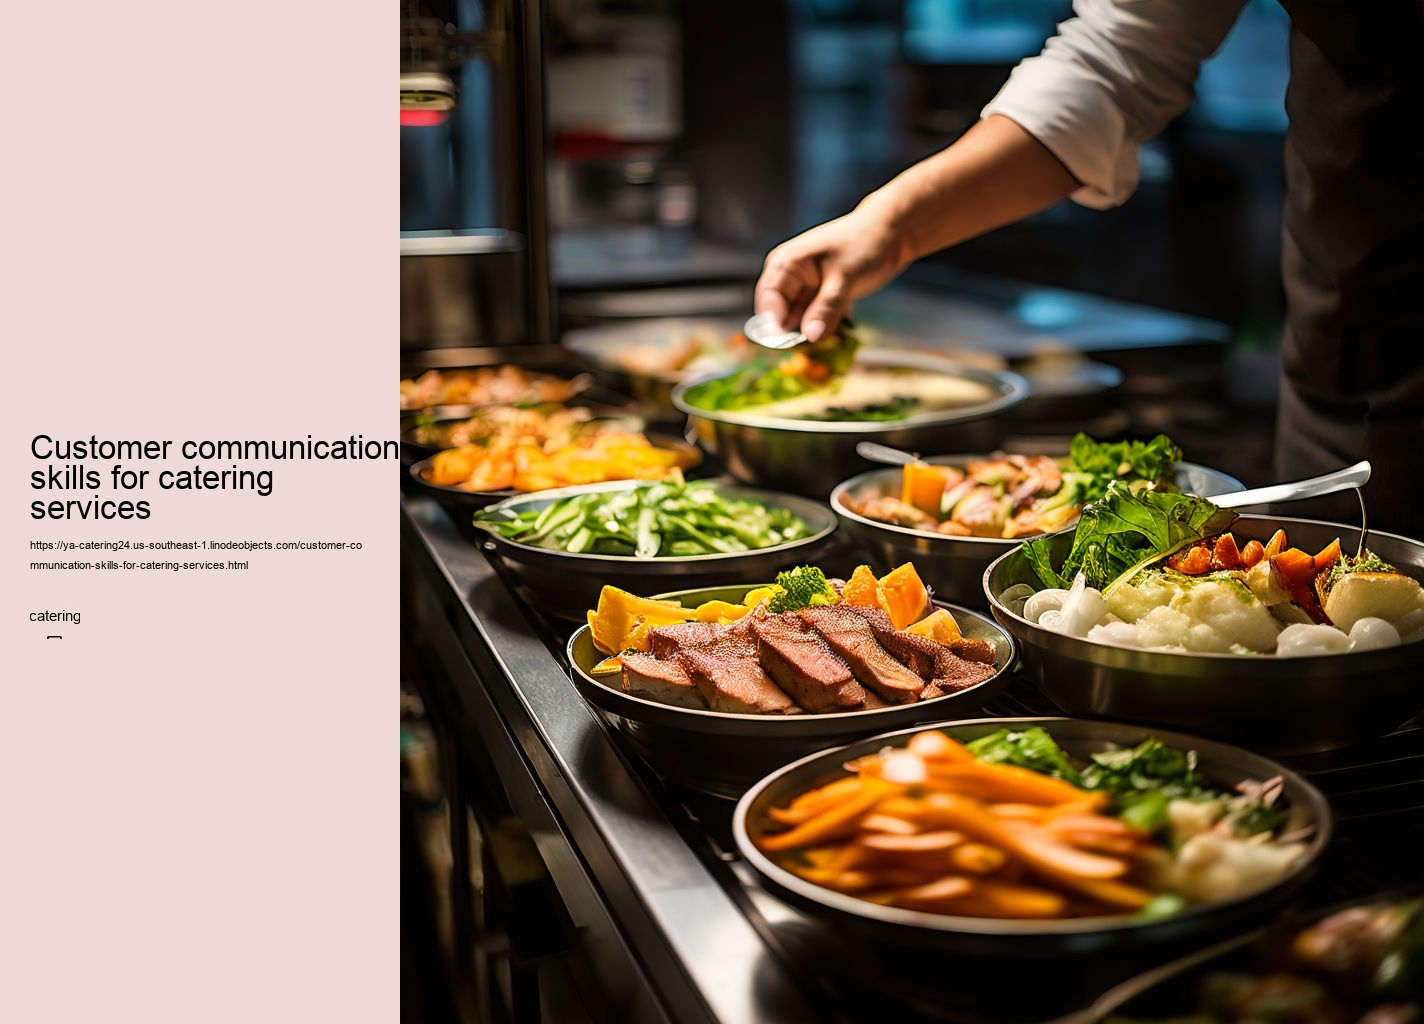 Customer communication skills for catering services